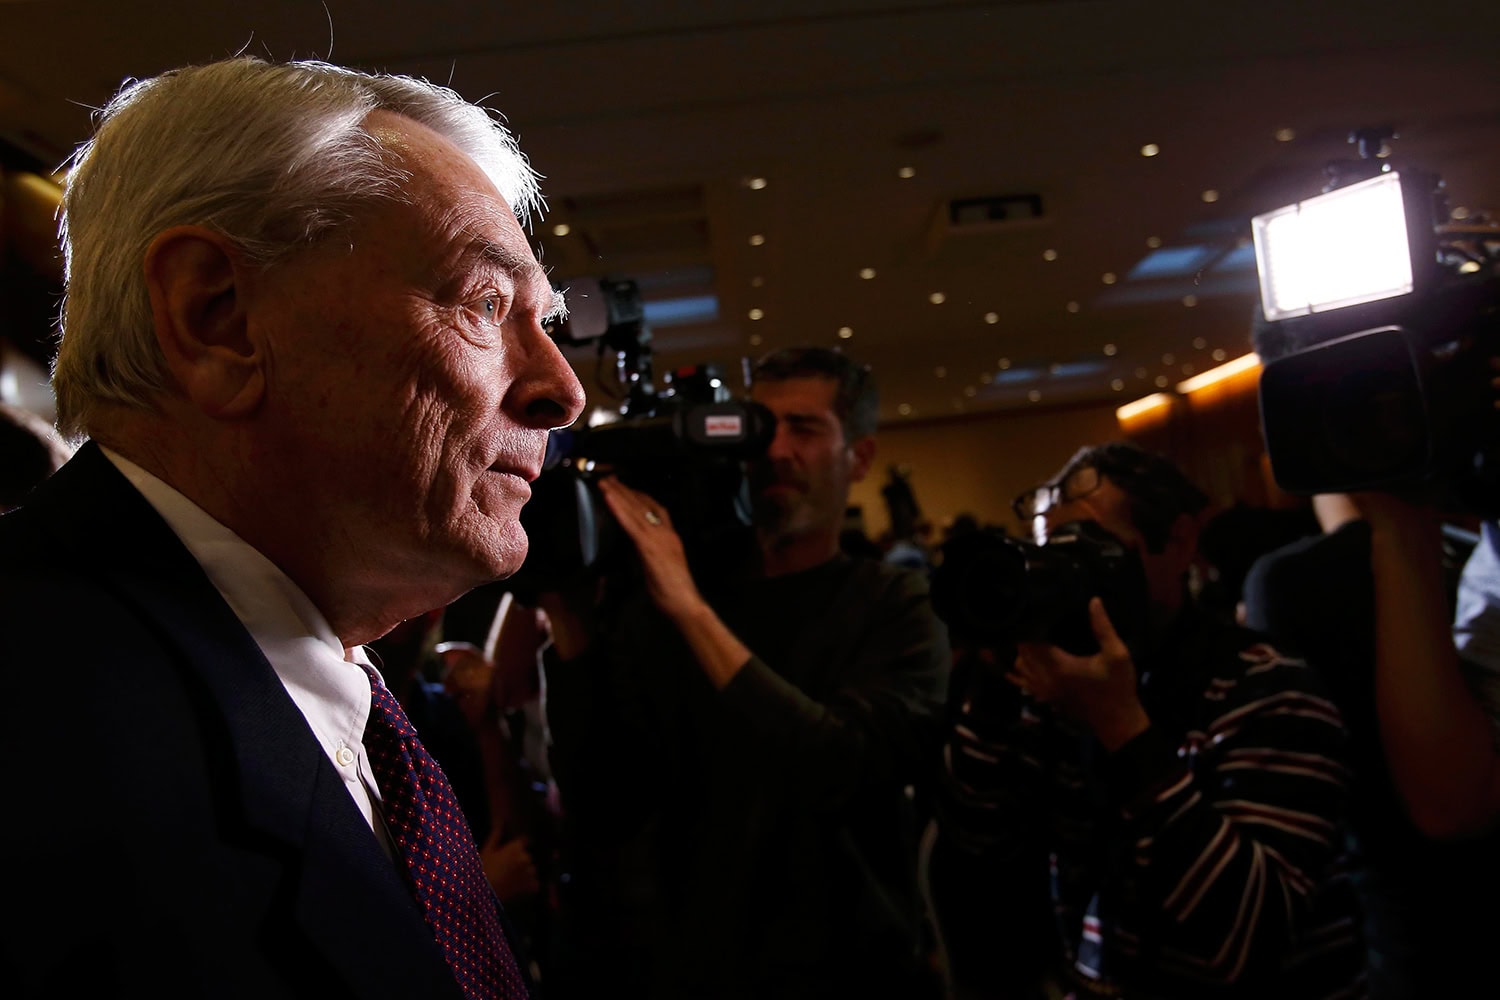 WADA accuses Russia of favoring doping and asks for suspension of federate athletes